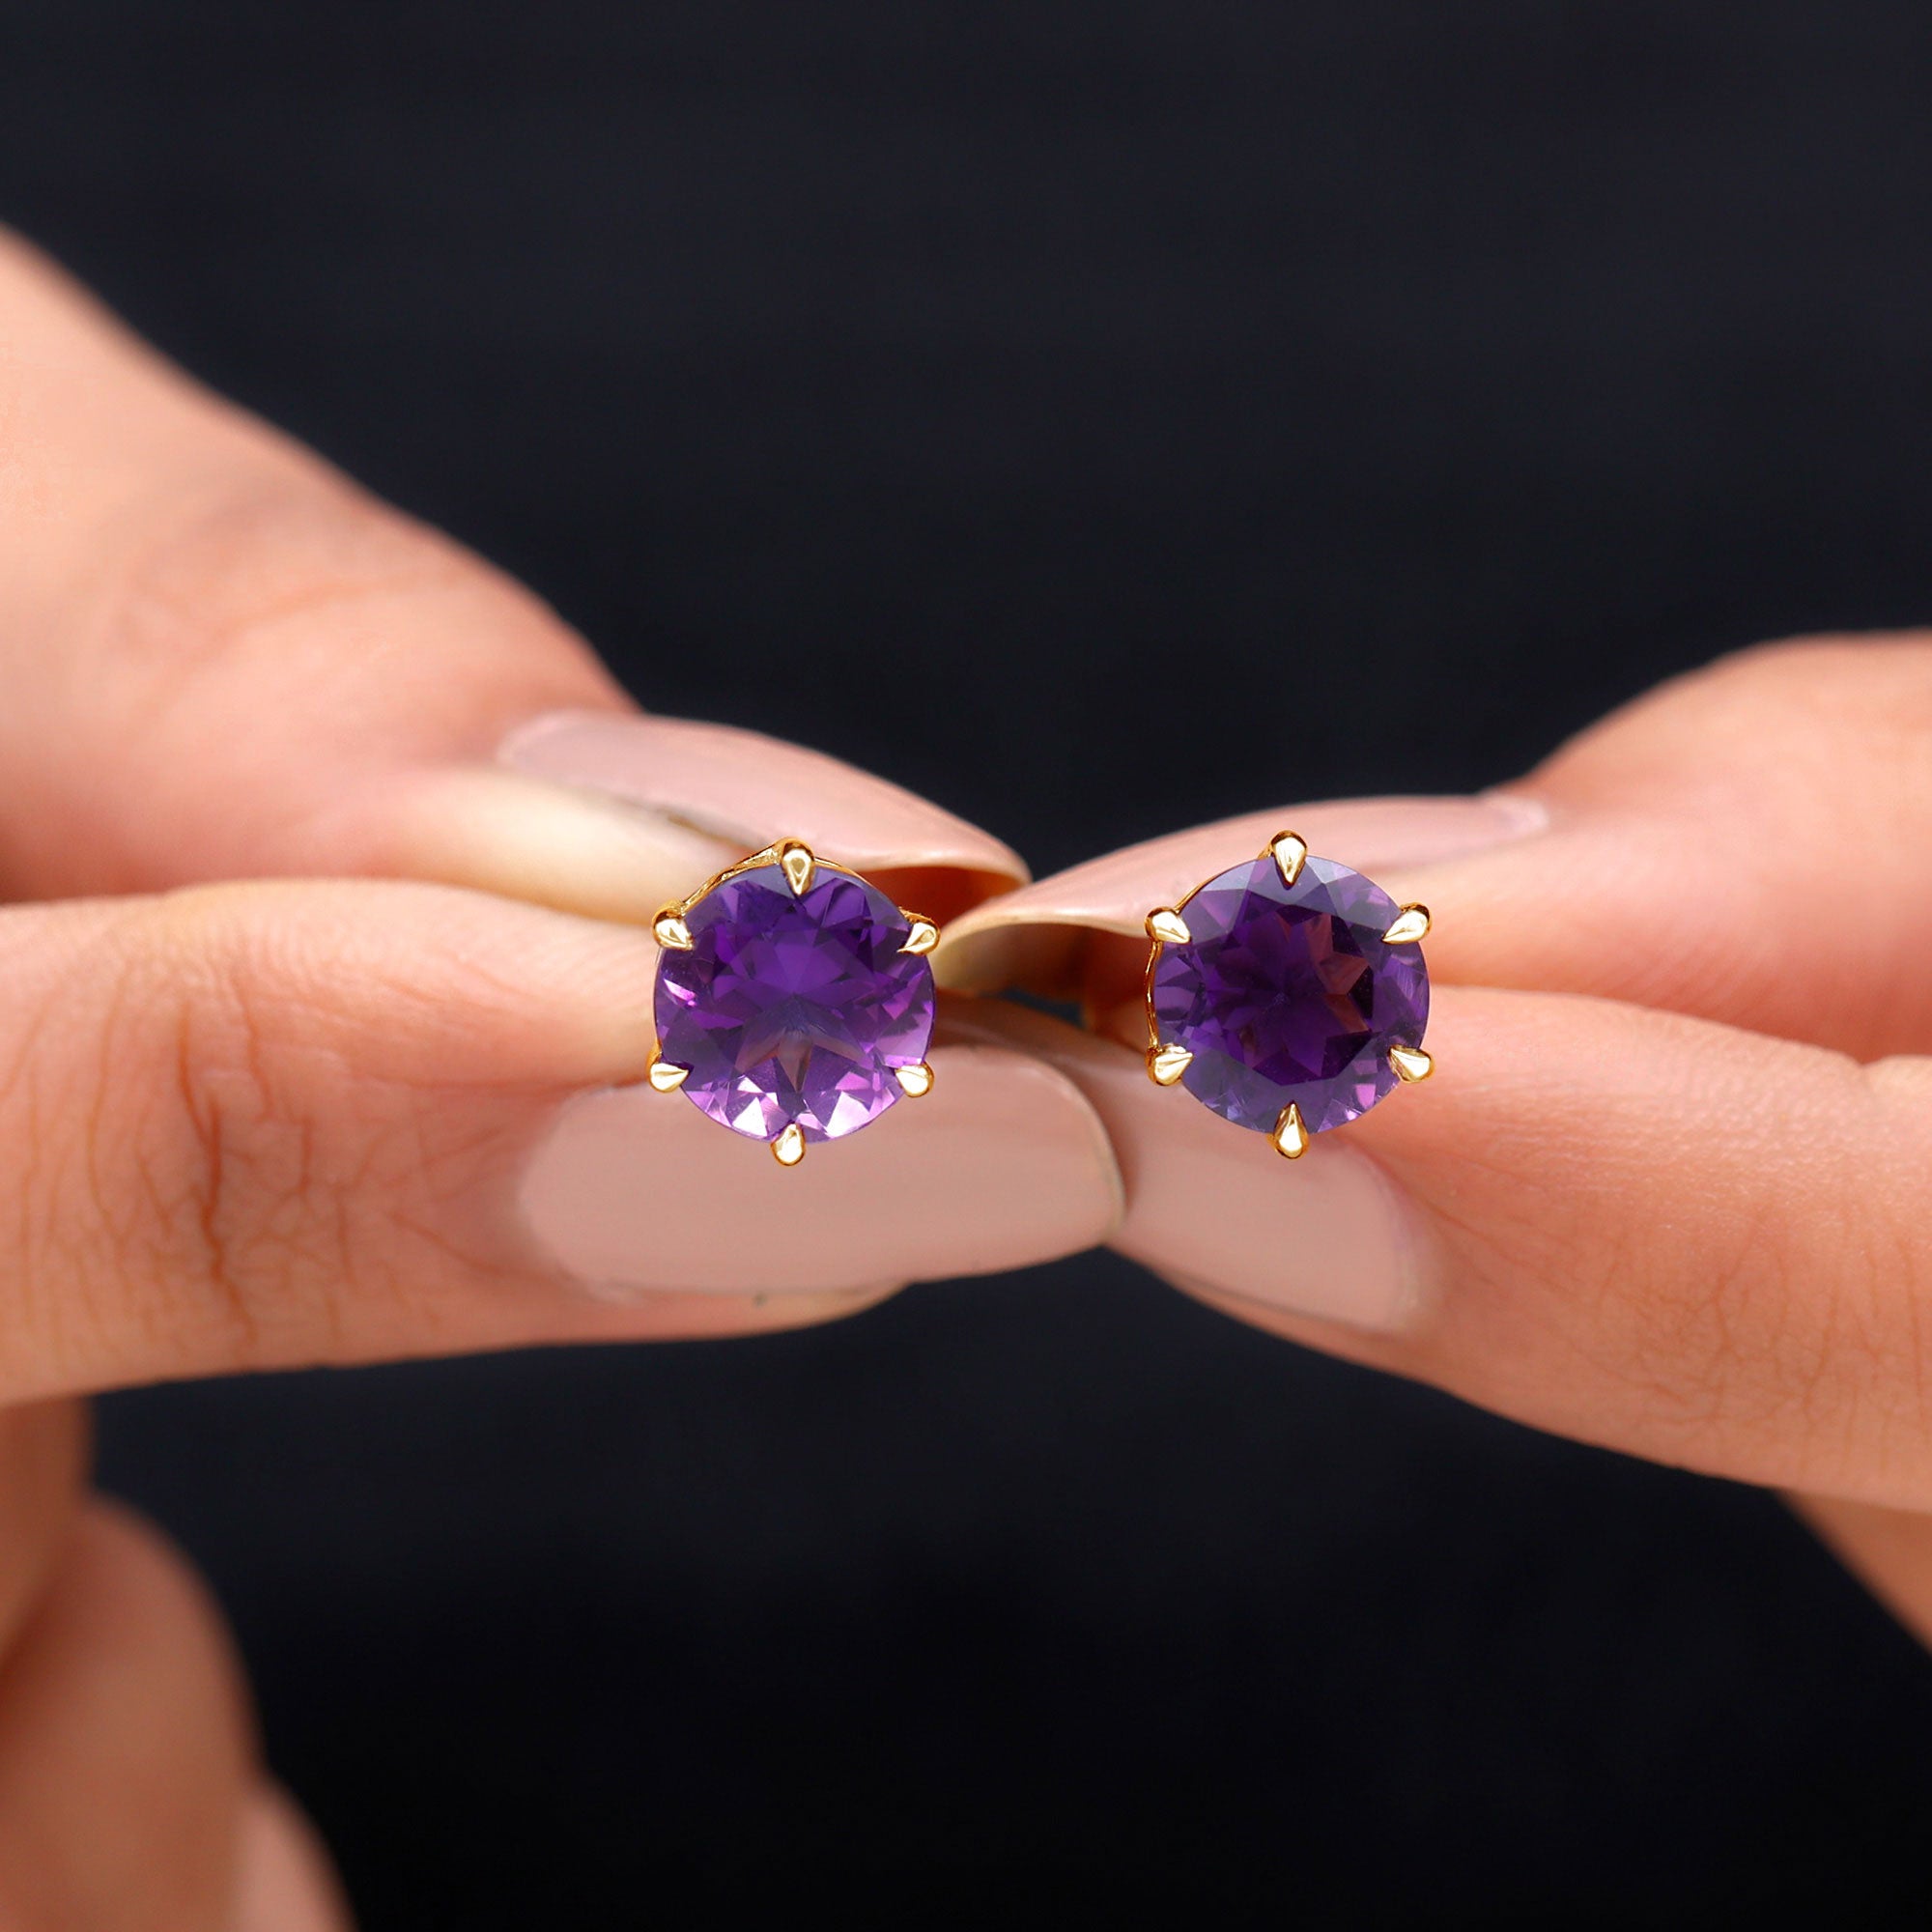 Solitaire Stud Earrings with Round Shaped Amethyst Amethyst - ( AAA ) - Quality - Rosec Jewels